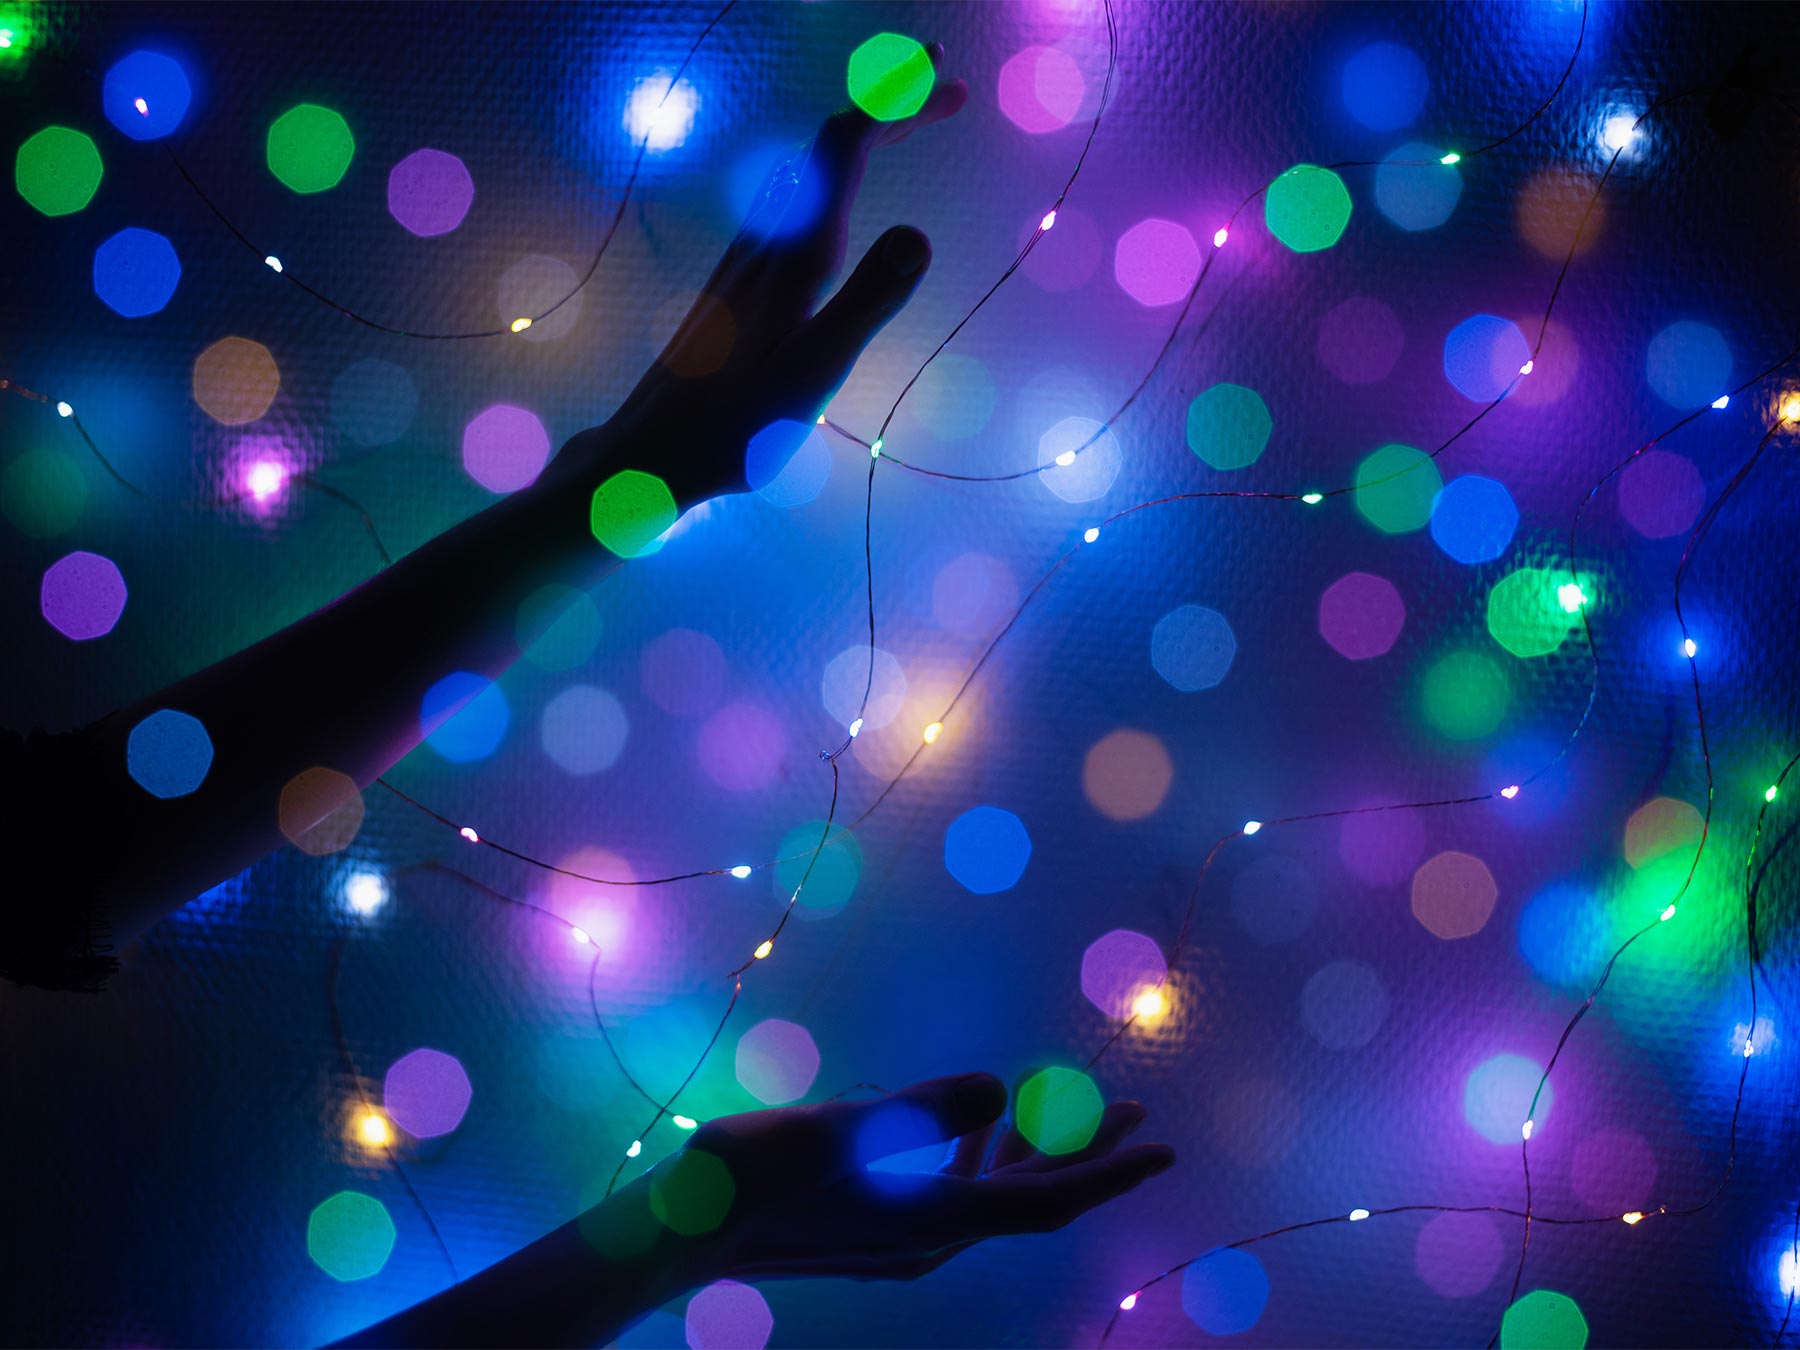 Holiday lights, hand reaching out, blue background with magenta, green, blue and orange lights